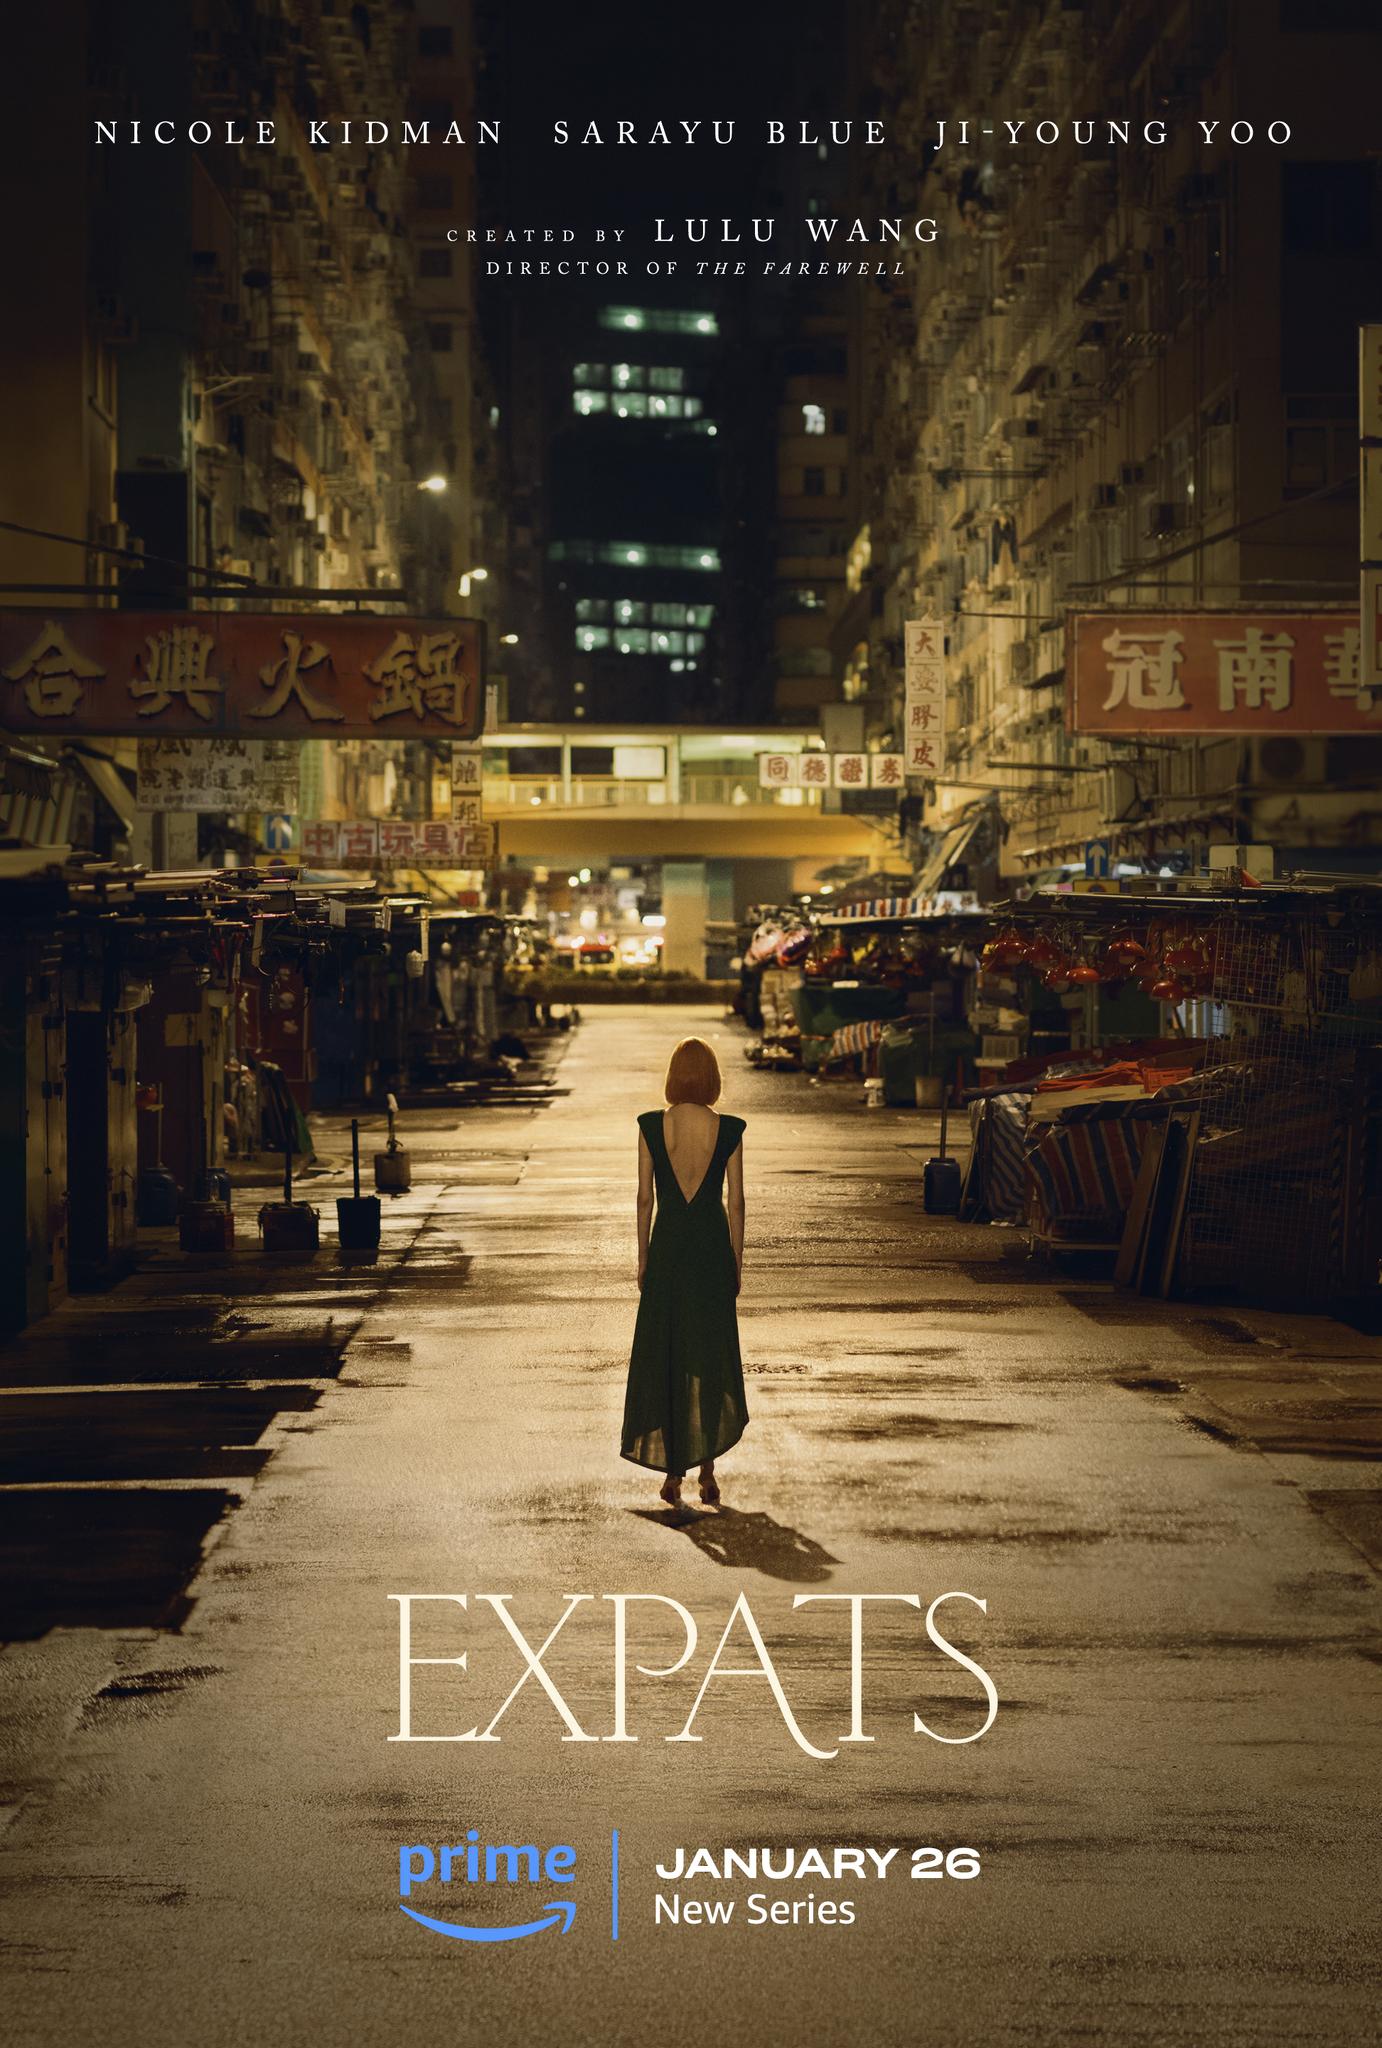 Expats (January 26) - Streaming on Prime VideoExpats is a six-episode drama series based on Janice Y. K. Lee’s novel 